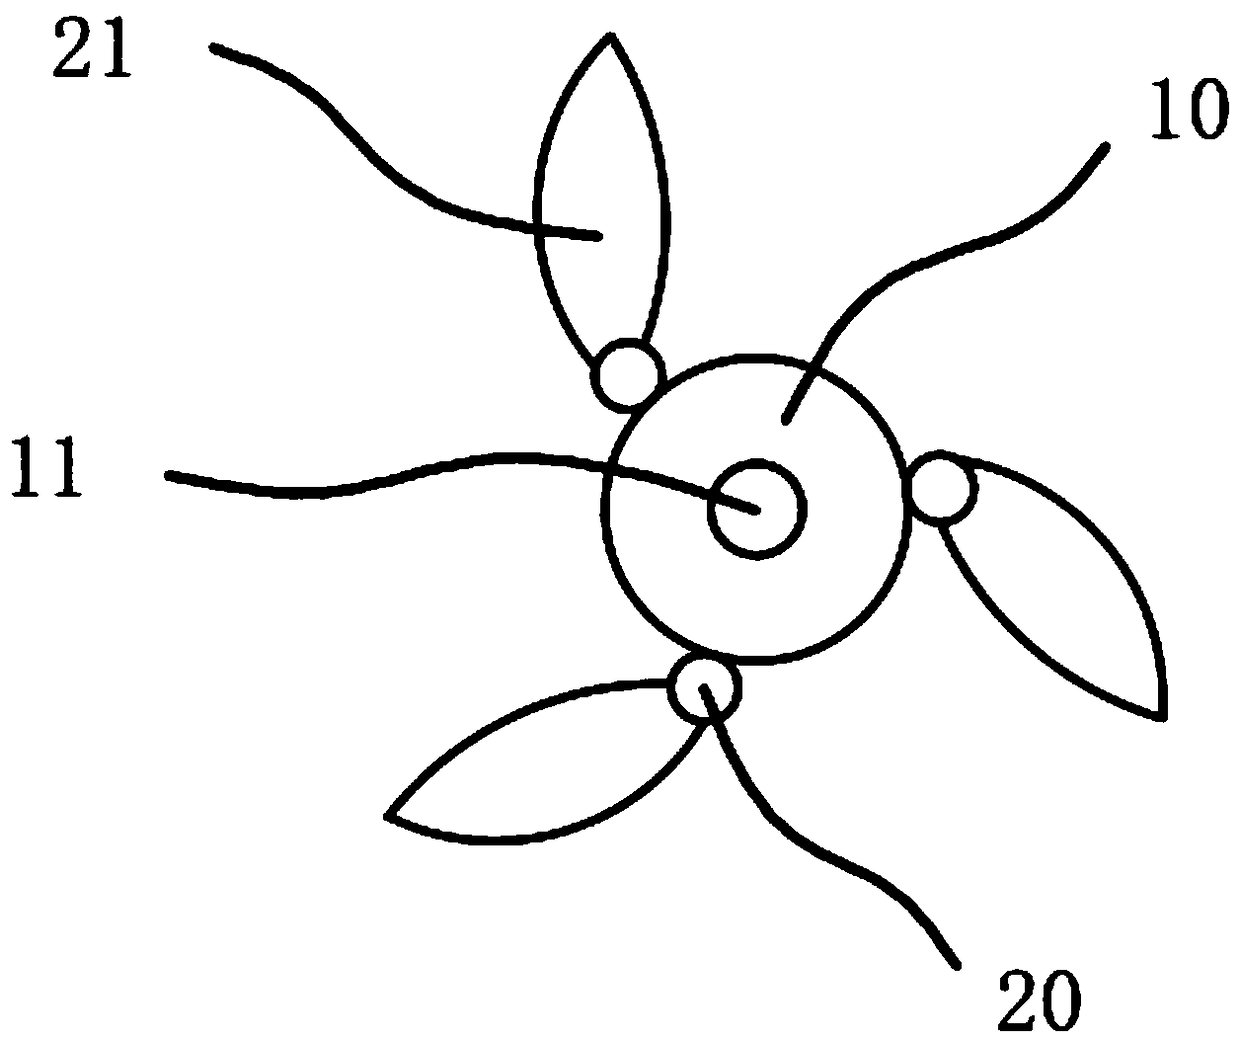 Fan capable of conducting fan blade opening and closing through rotation